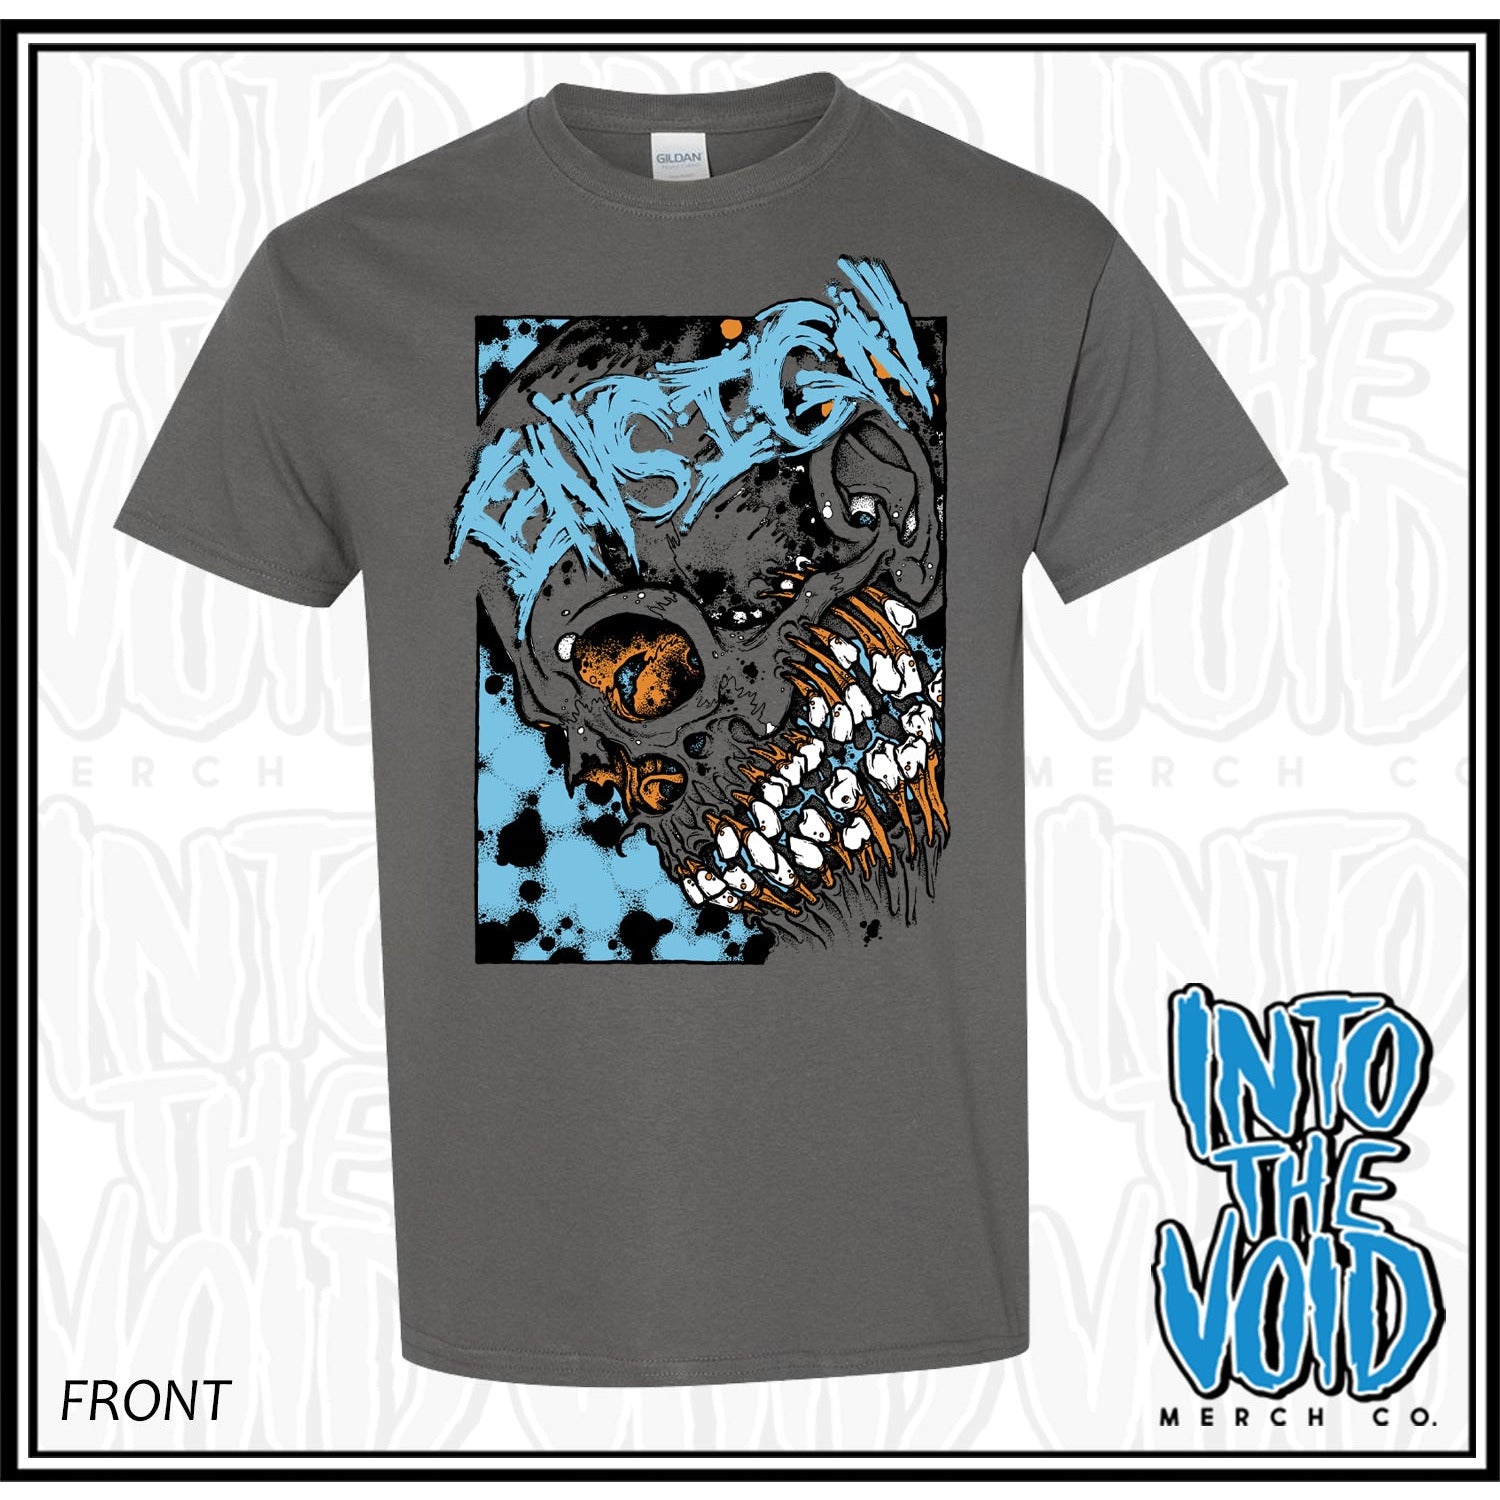 ENSIGN - WOLF BROS - Short Sleeve T-Shirt - INTO THE VOID Merch Co.